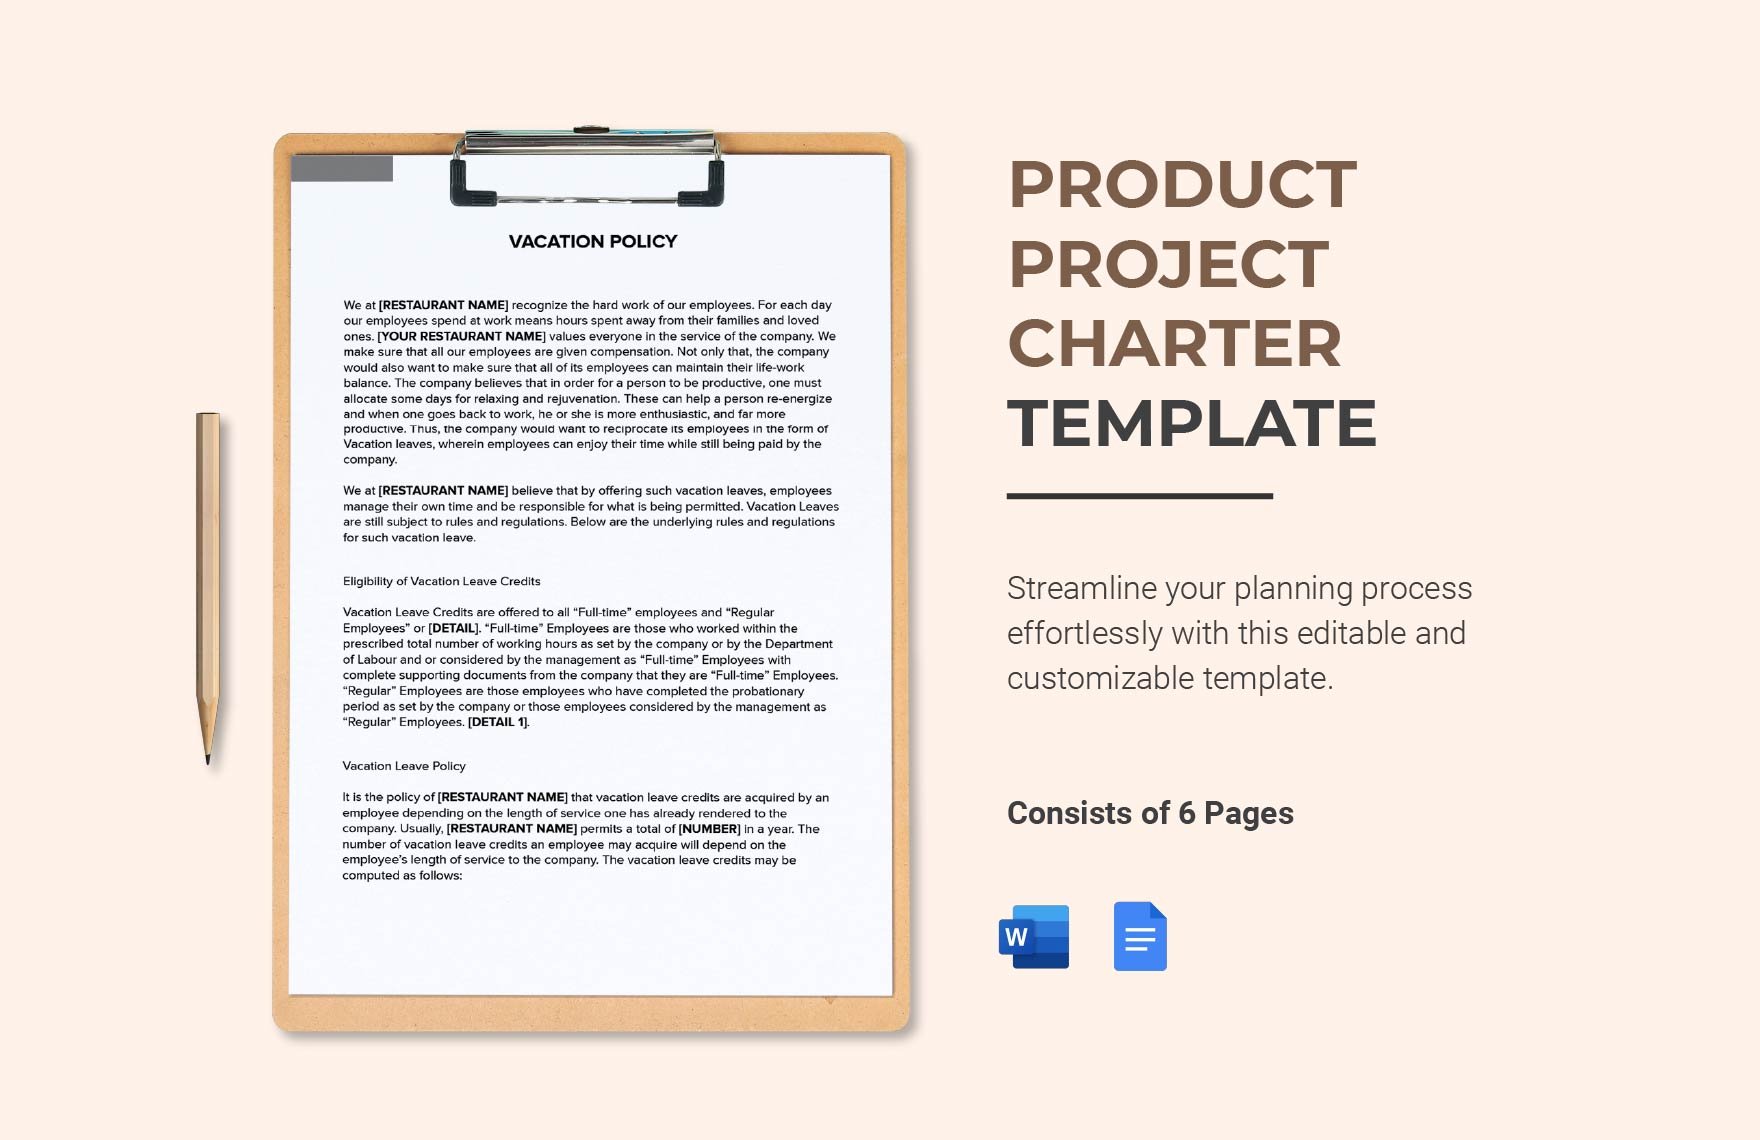 Product Project Charter Template